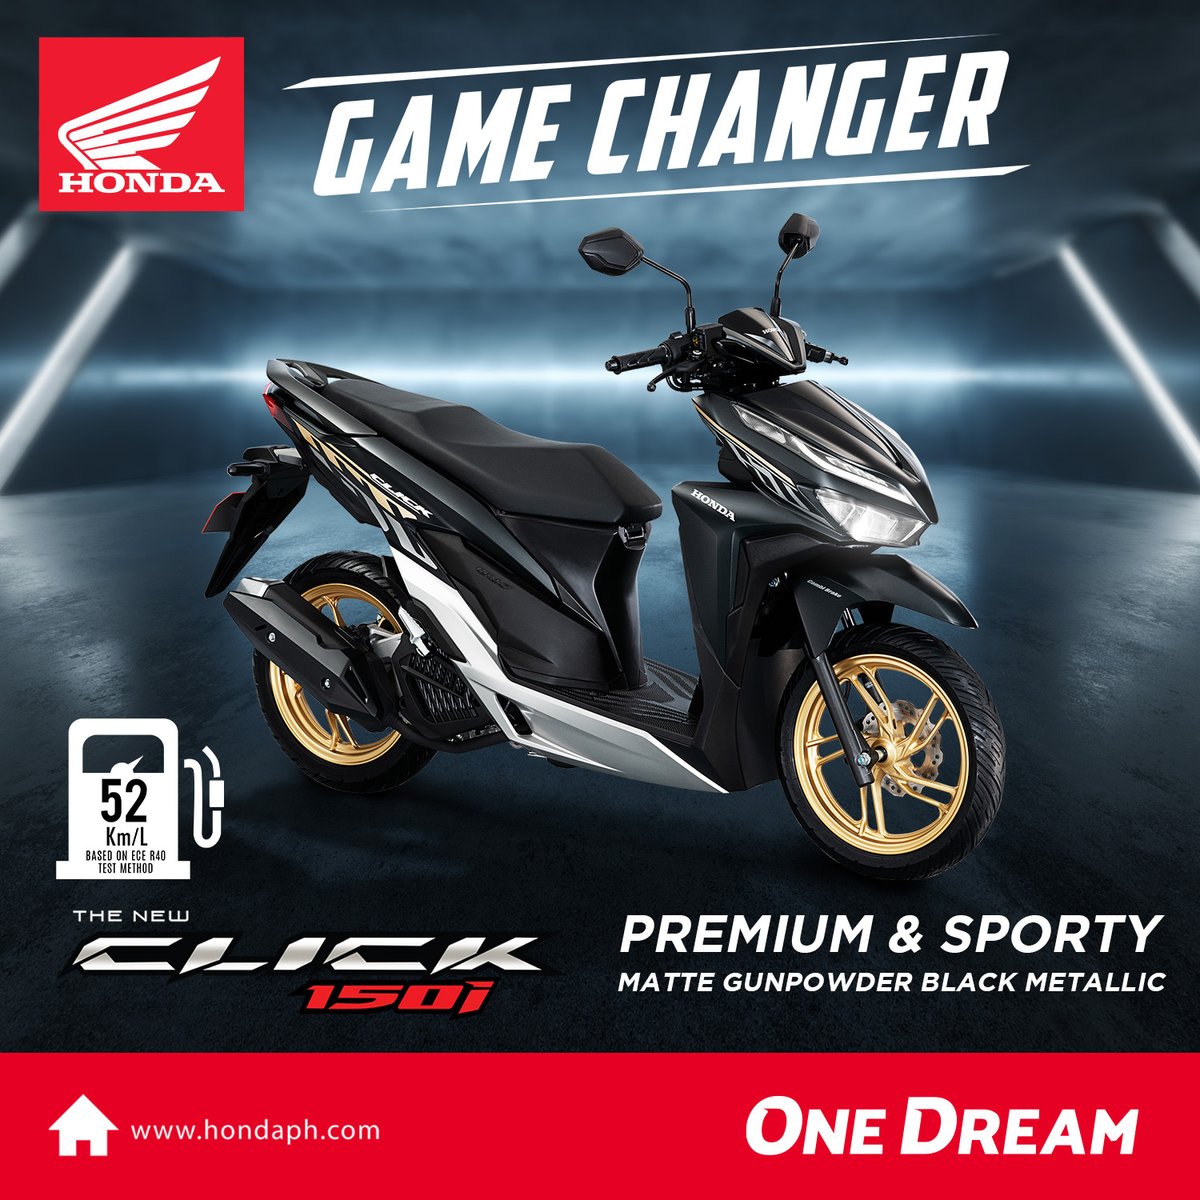 Honda Philippines Look Sharp With The New Click150i In Classy Matte Gunpowder Black Metallic With A Premium Sporty Design And Game Changing Performance To Match Make A Statement On The Road